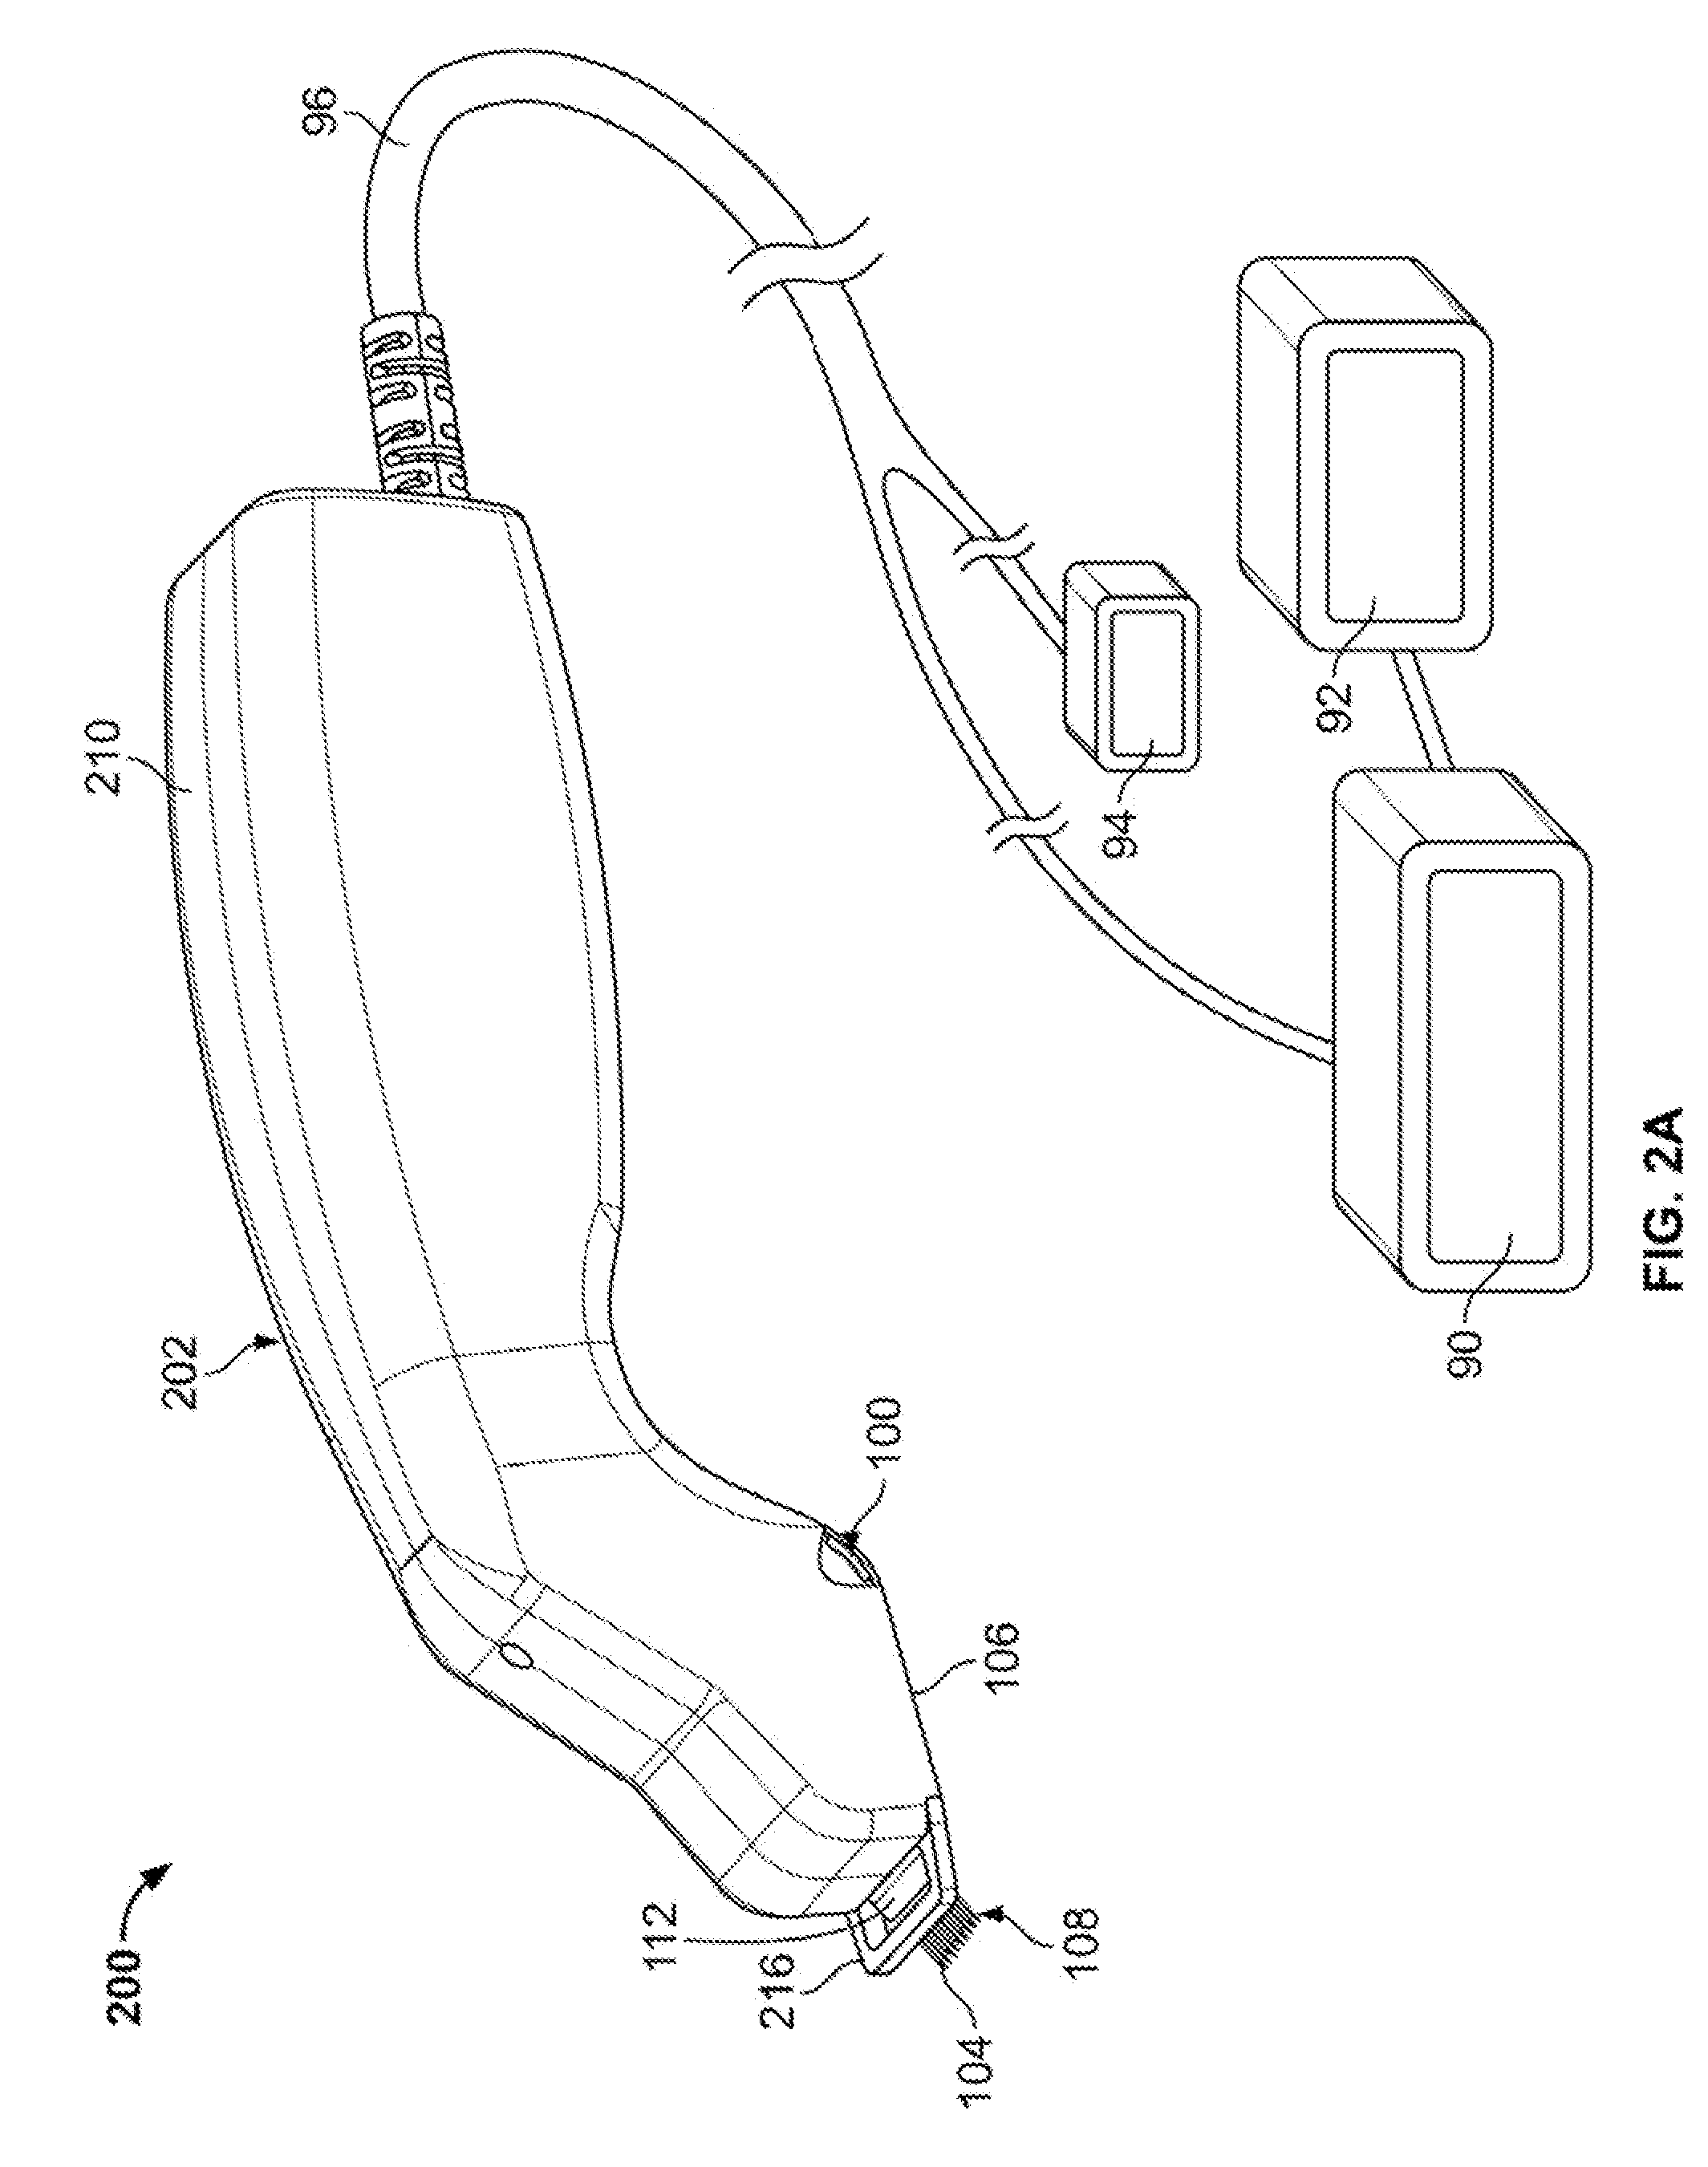 Devices and methods for percutaneous energy delivery